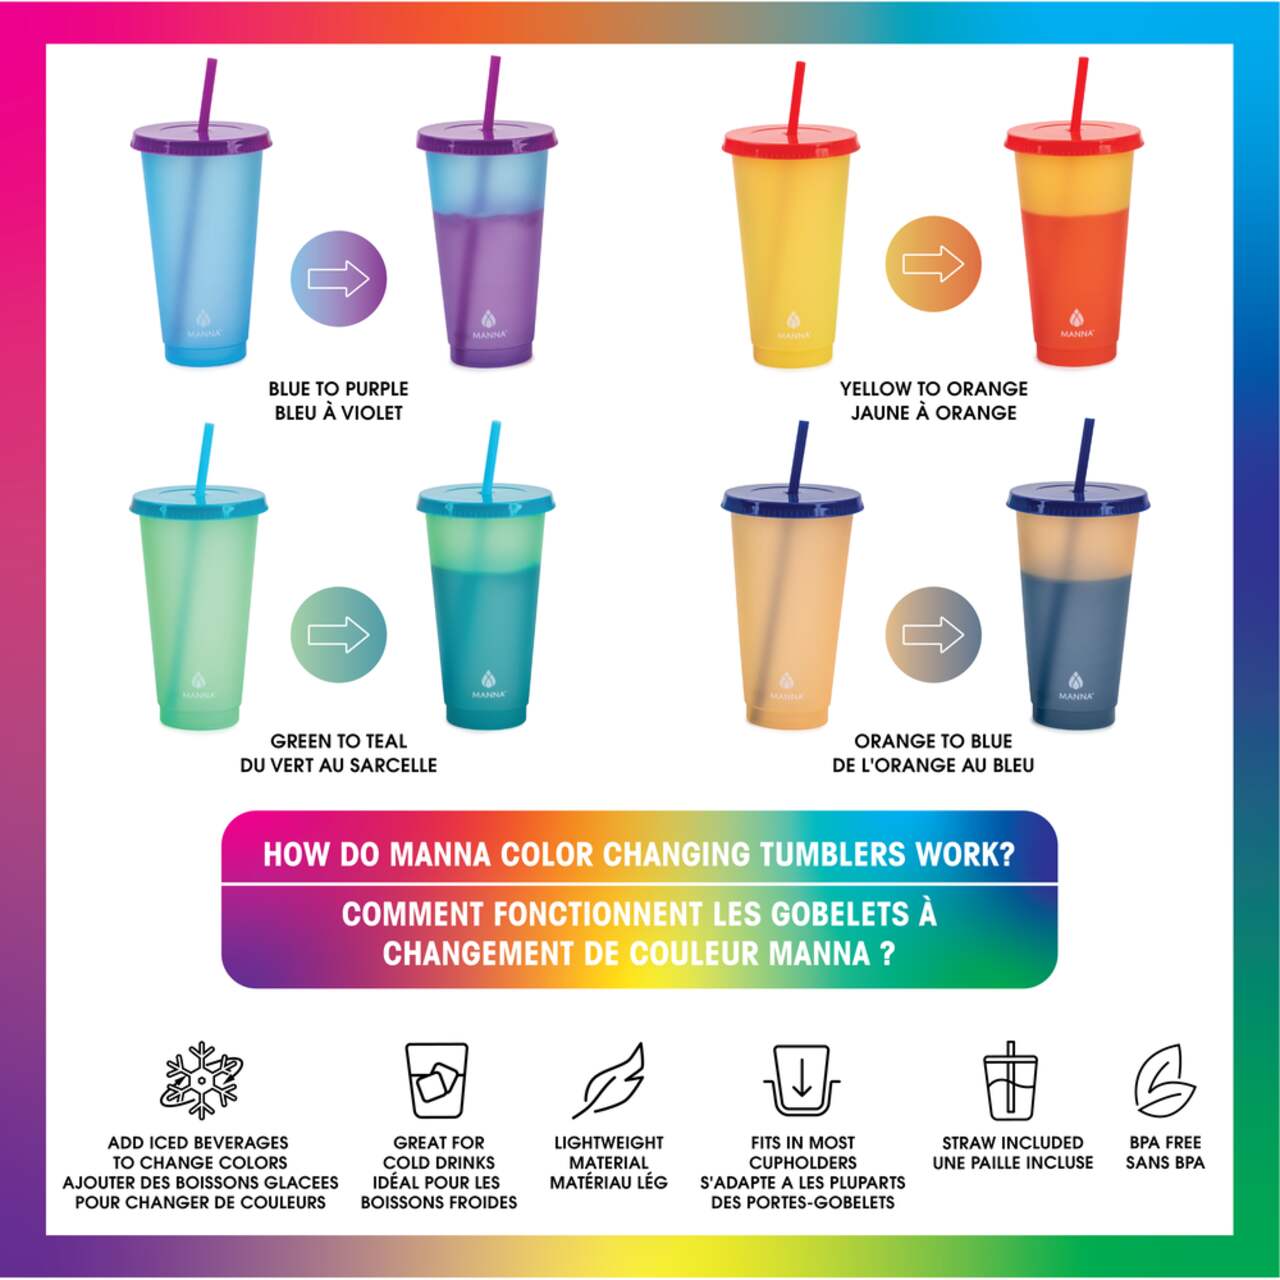 https://media-www.canadiantire.ca/product/living/kitchen/food-storage/1426322/manna-cold-colour-changing-tumbler-4-pk-70453c08-773e-418f-8e90-c8246c13fe8e.png?imdensity=1&imwidth=1244&impolicy=mZoom